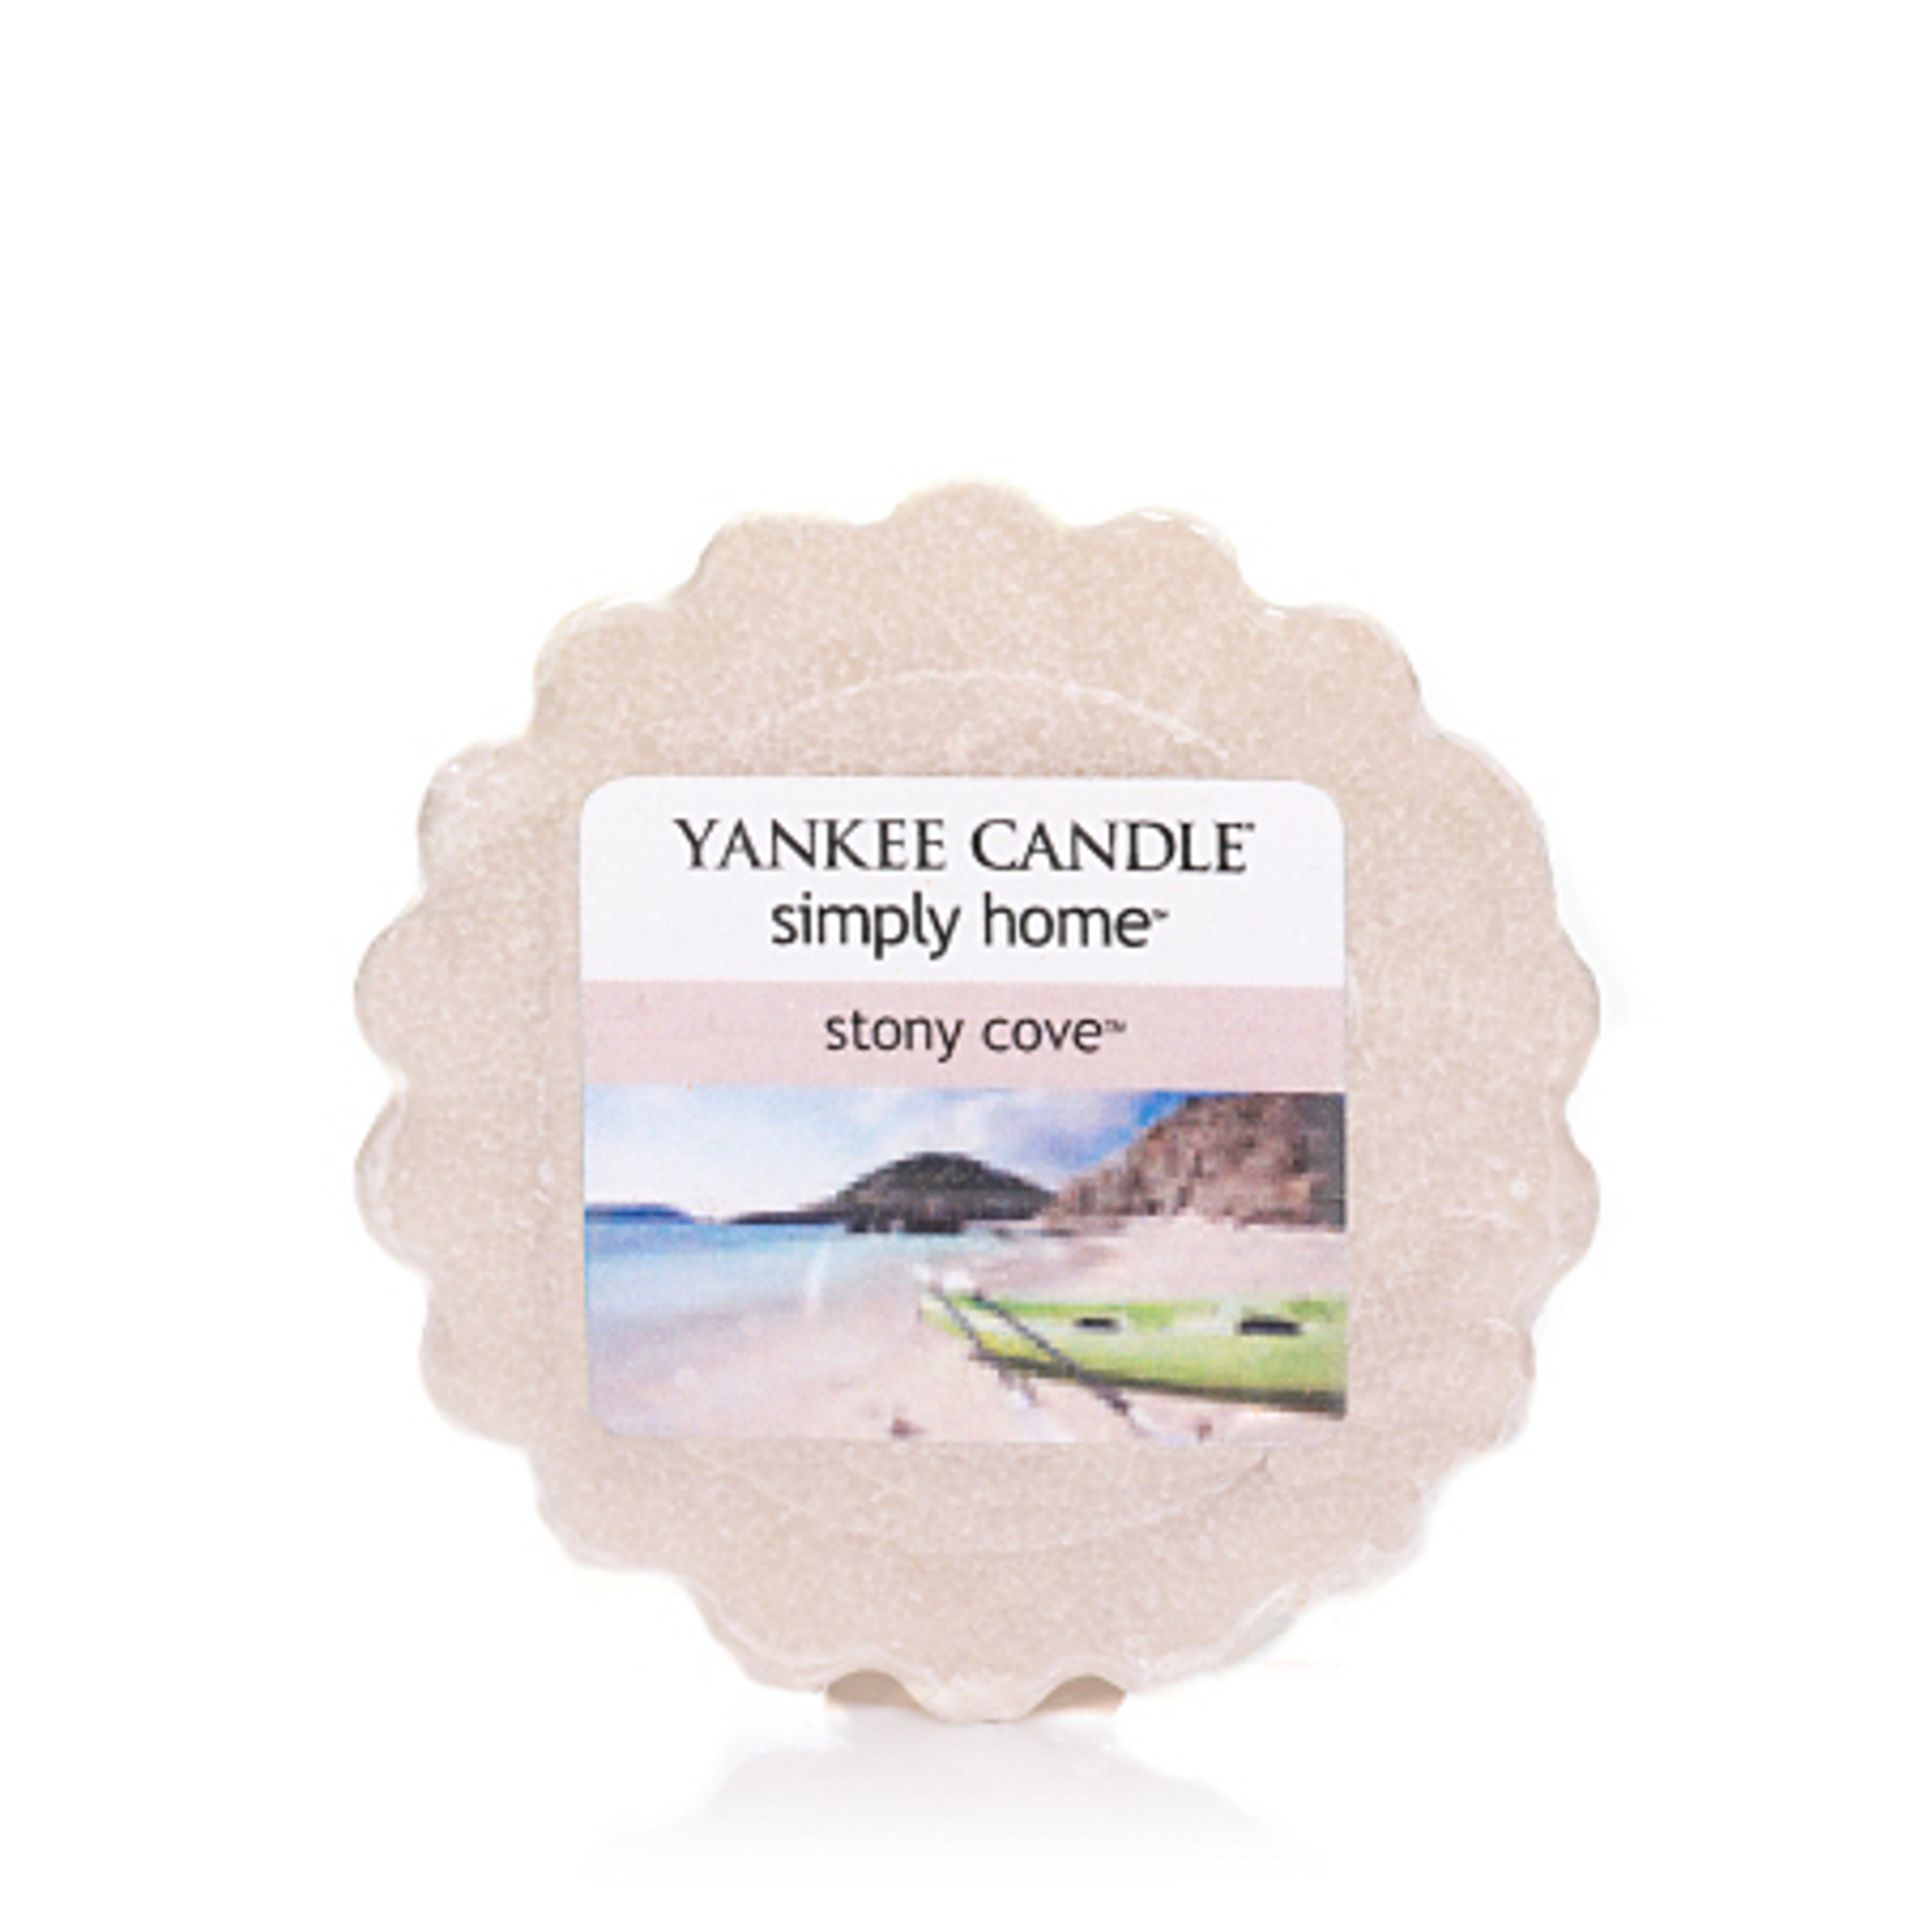 V *TRADE QTY* Brand New 24 x Yankee Candle Tarts Stony Cove RRP: £35.76 (Yankee Candles) X 4 YOUR